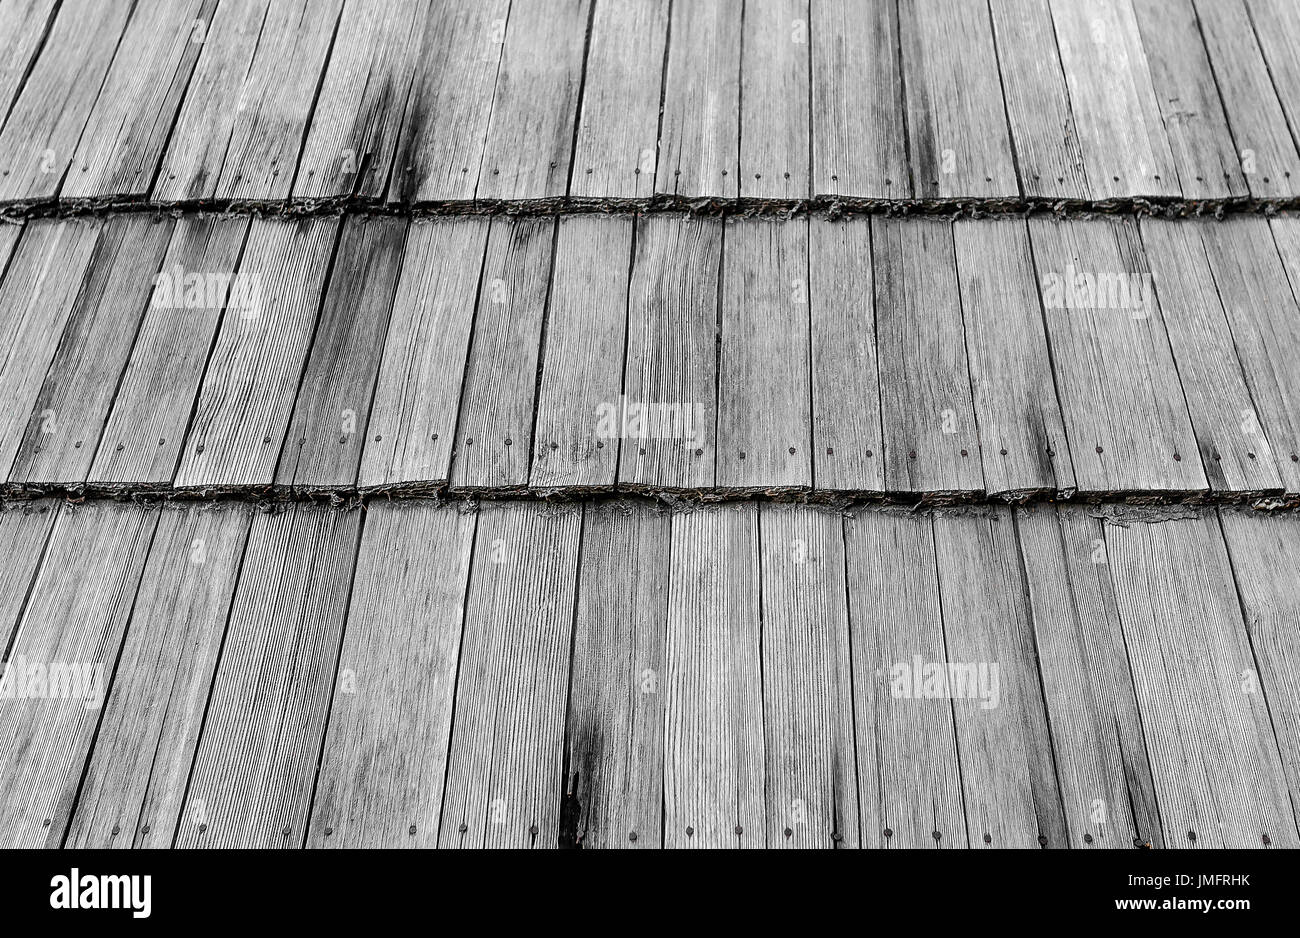 Wooden roof of an old house. Stock Photo